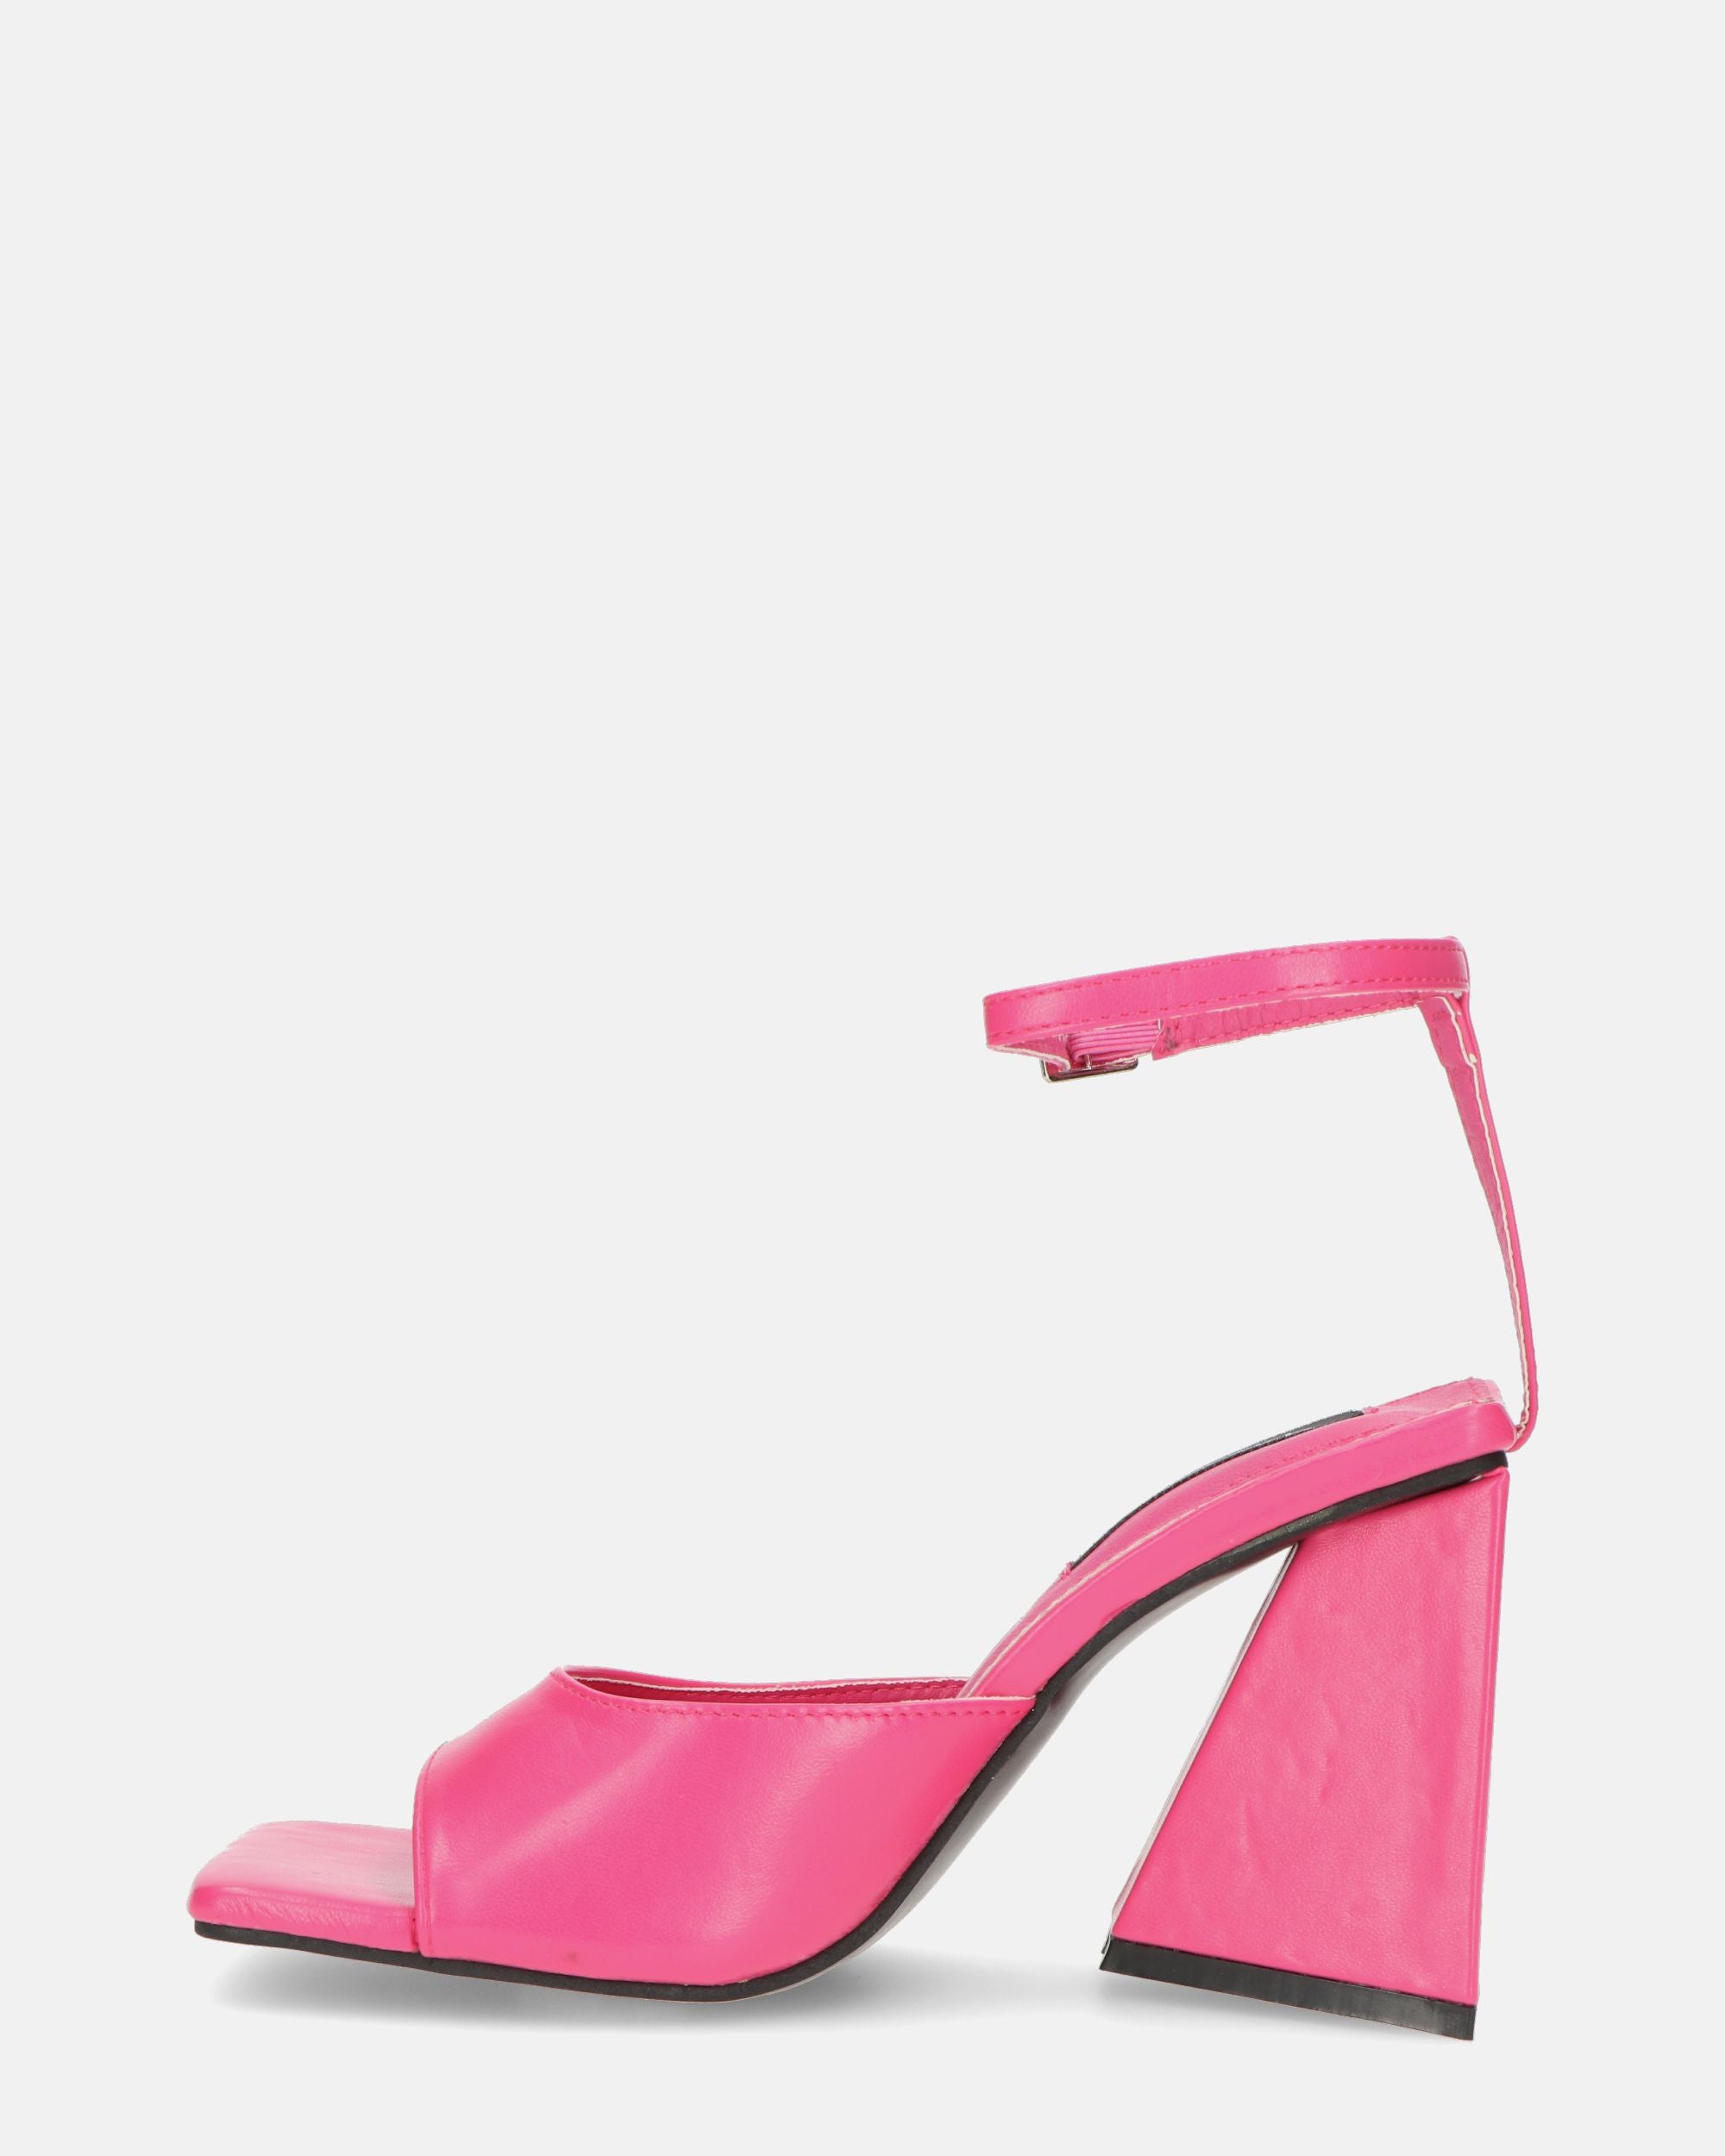 KUBRA - sandals with strap in pink PU